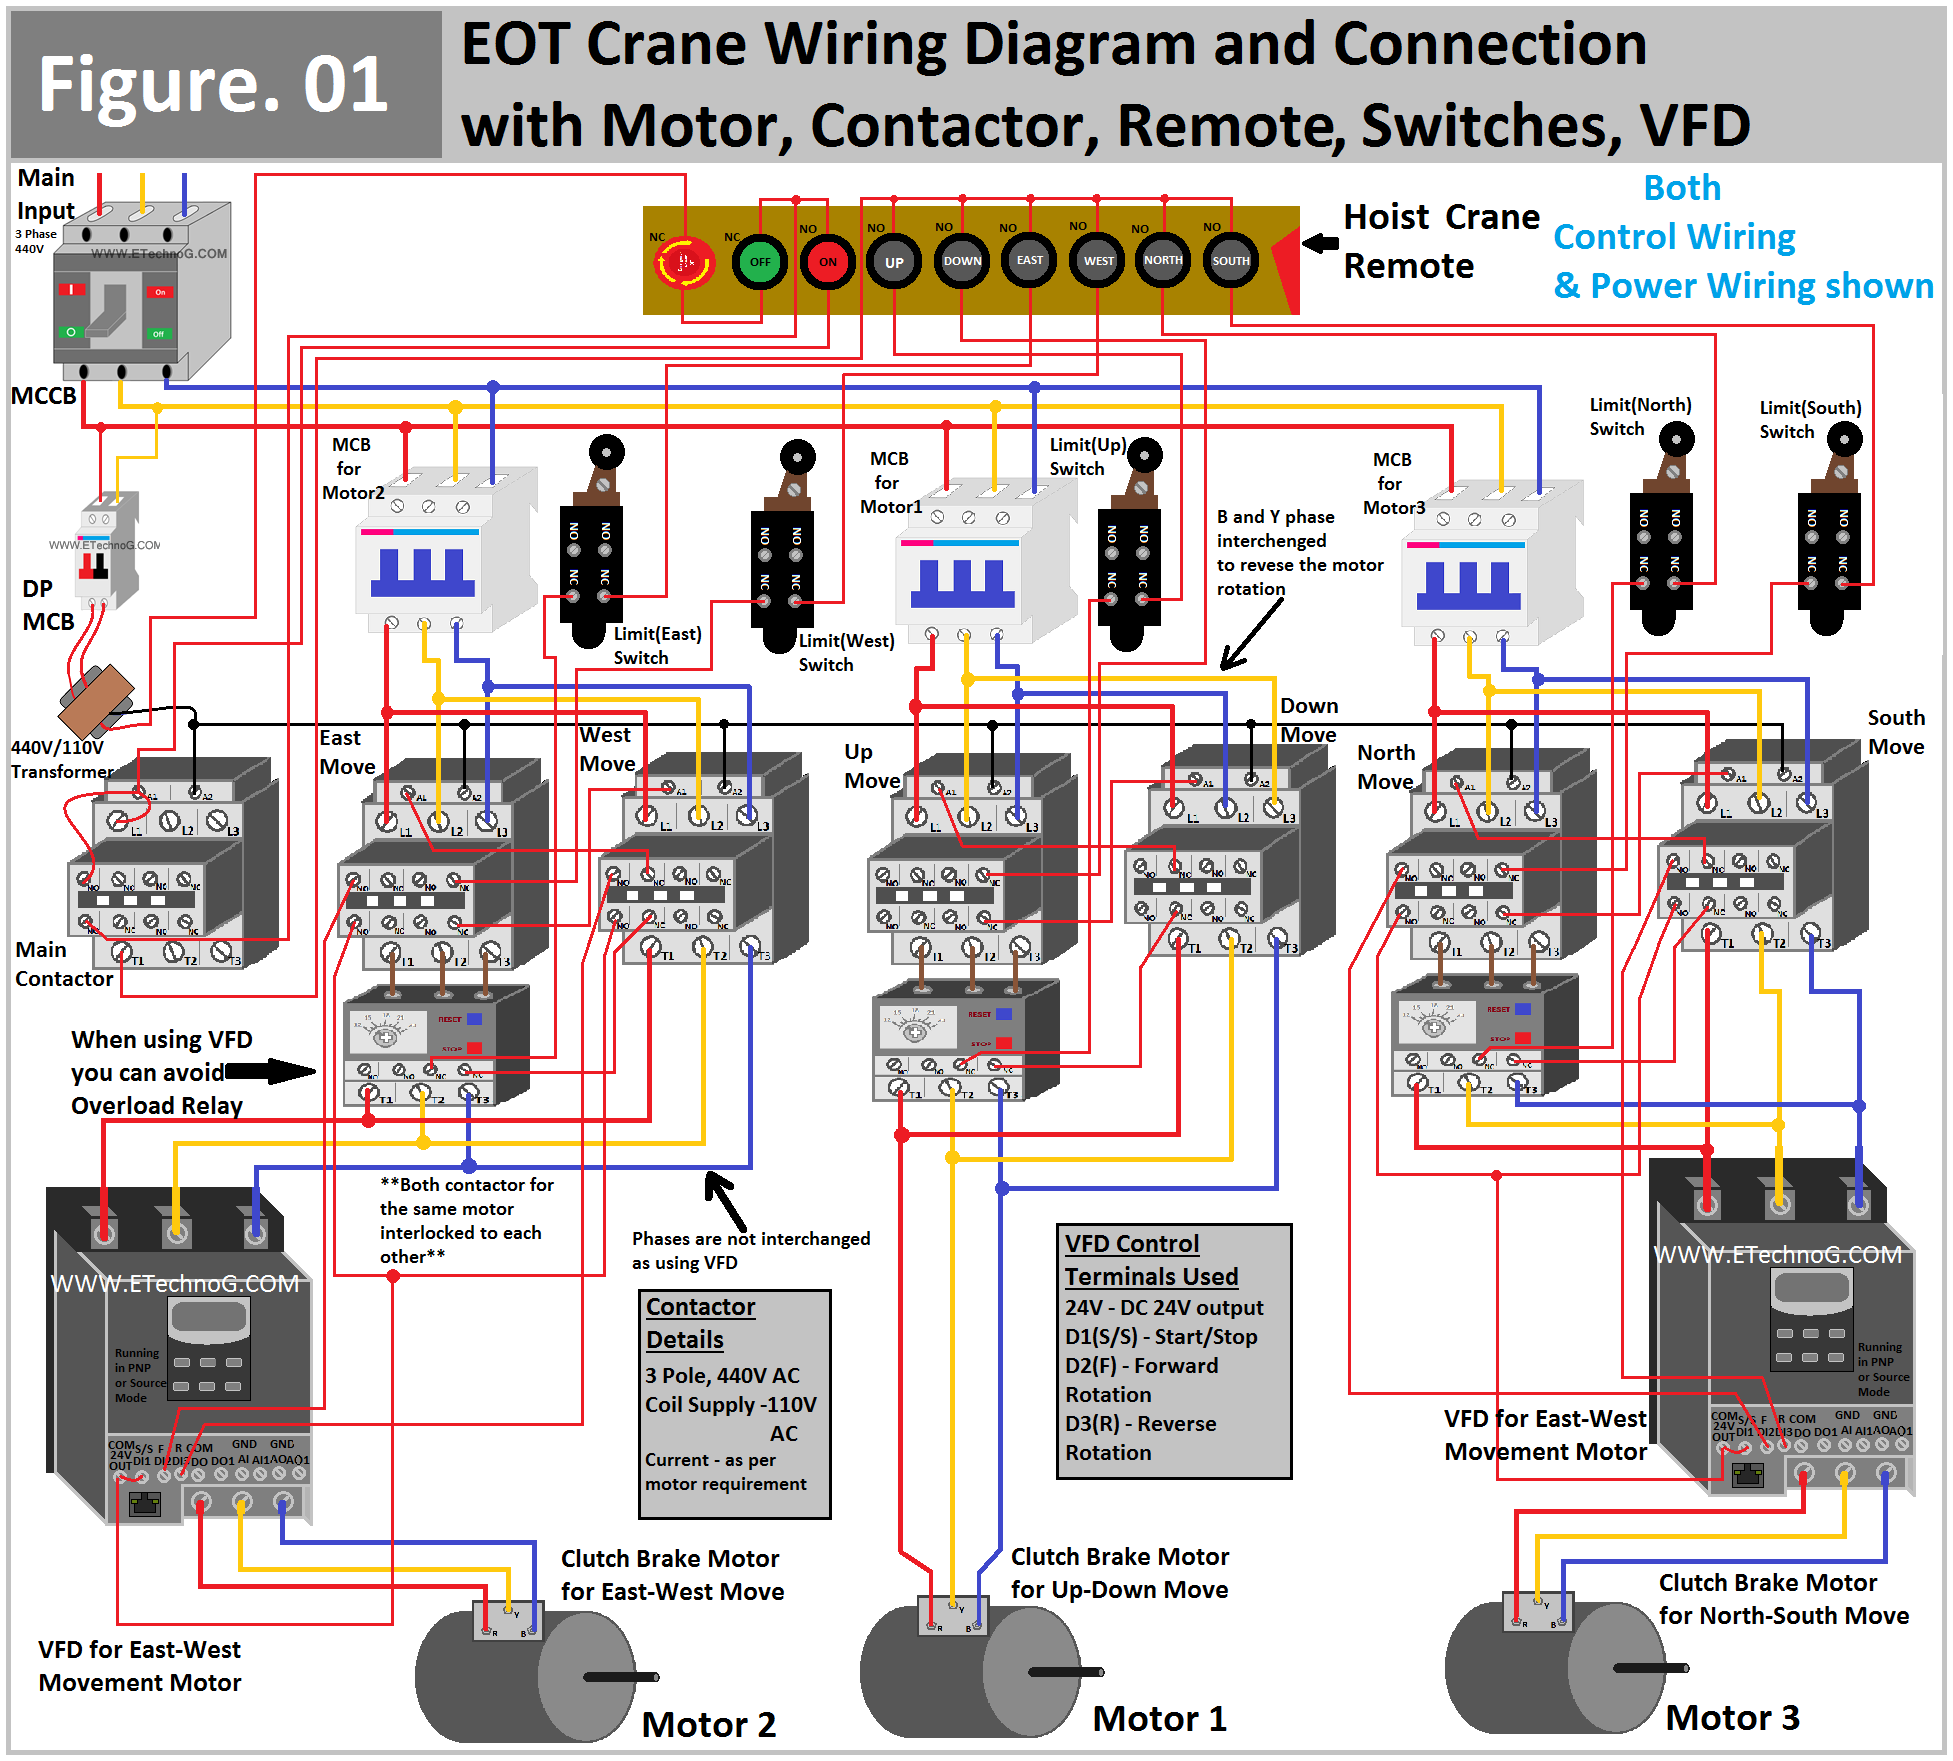 EOT Crane Wiring Diagram with Motor, Contactor, VFD, Switch